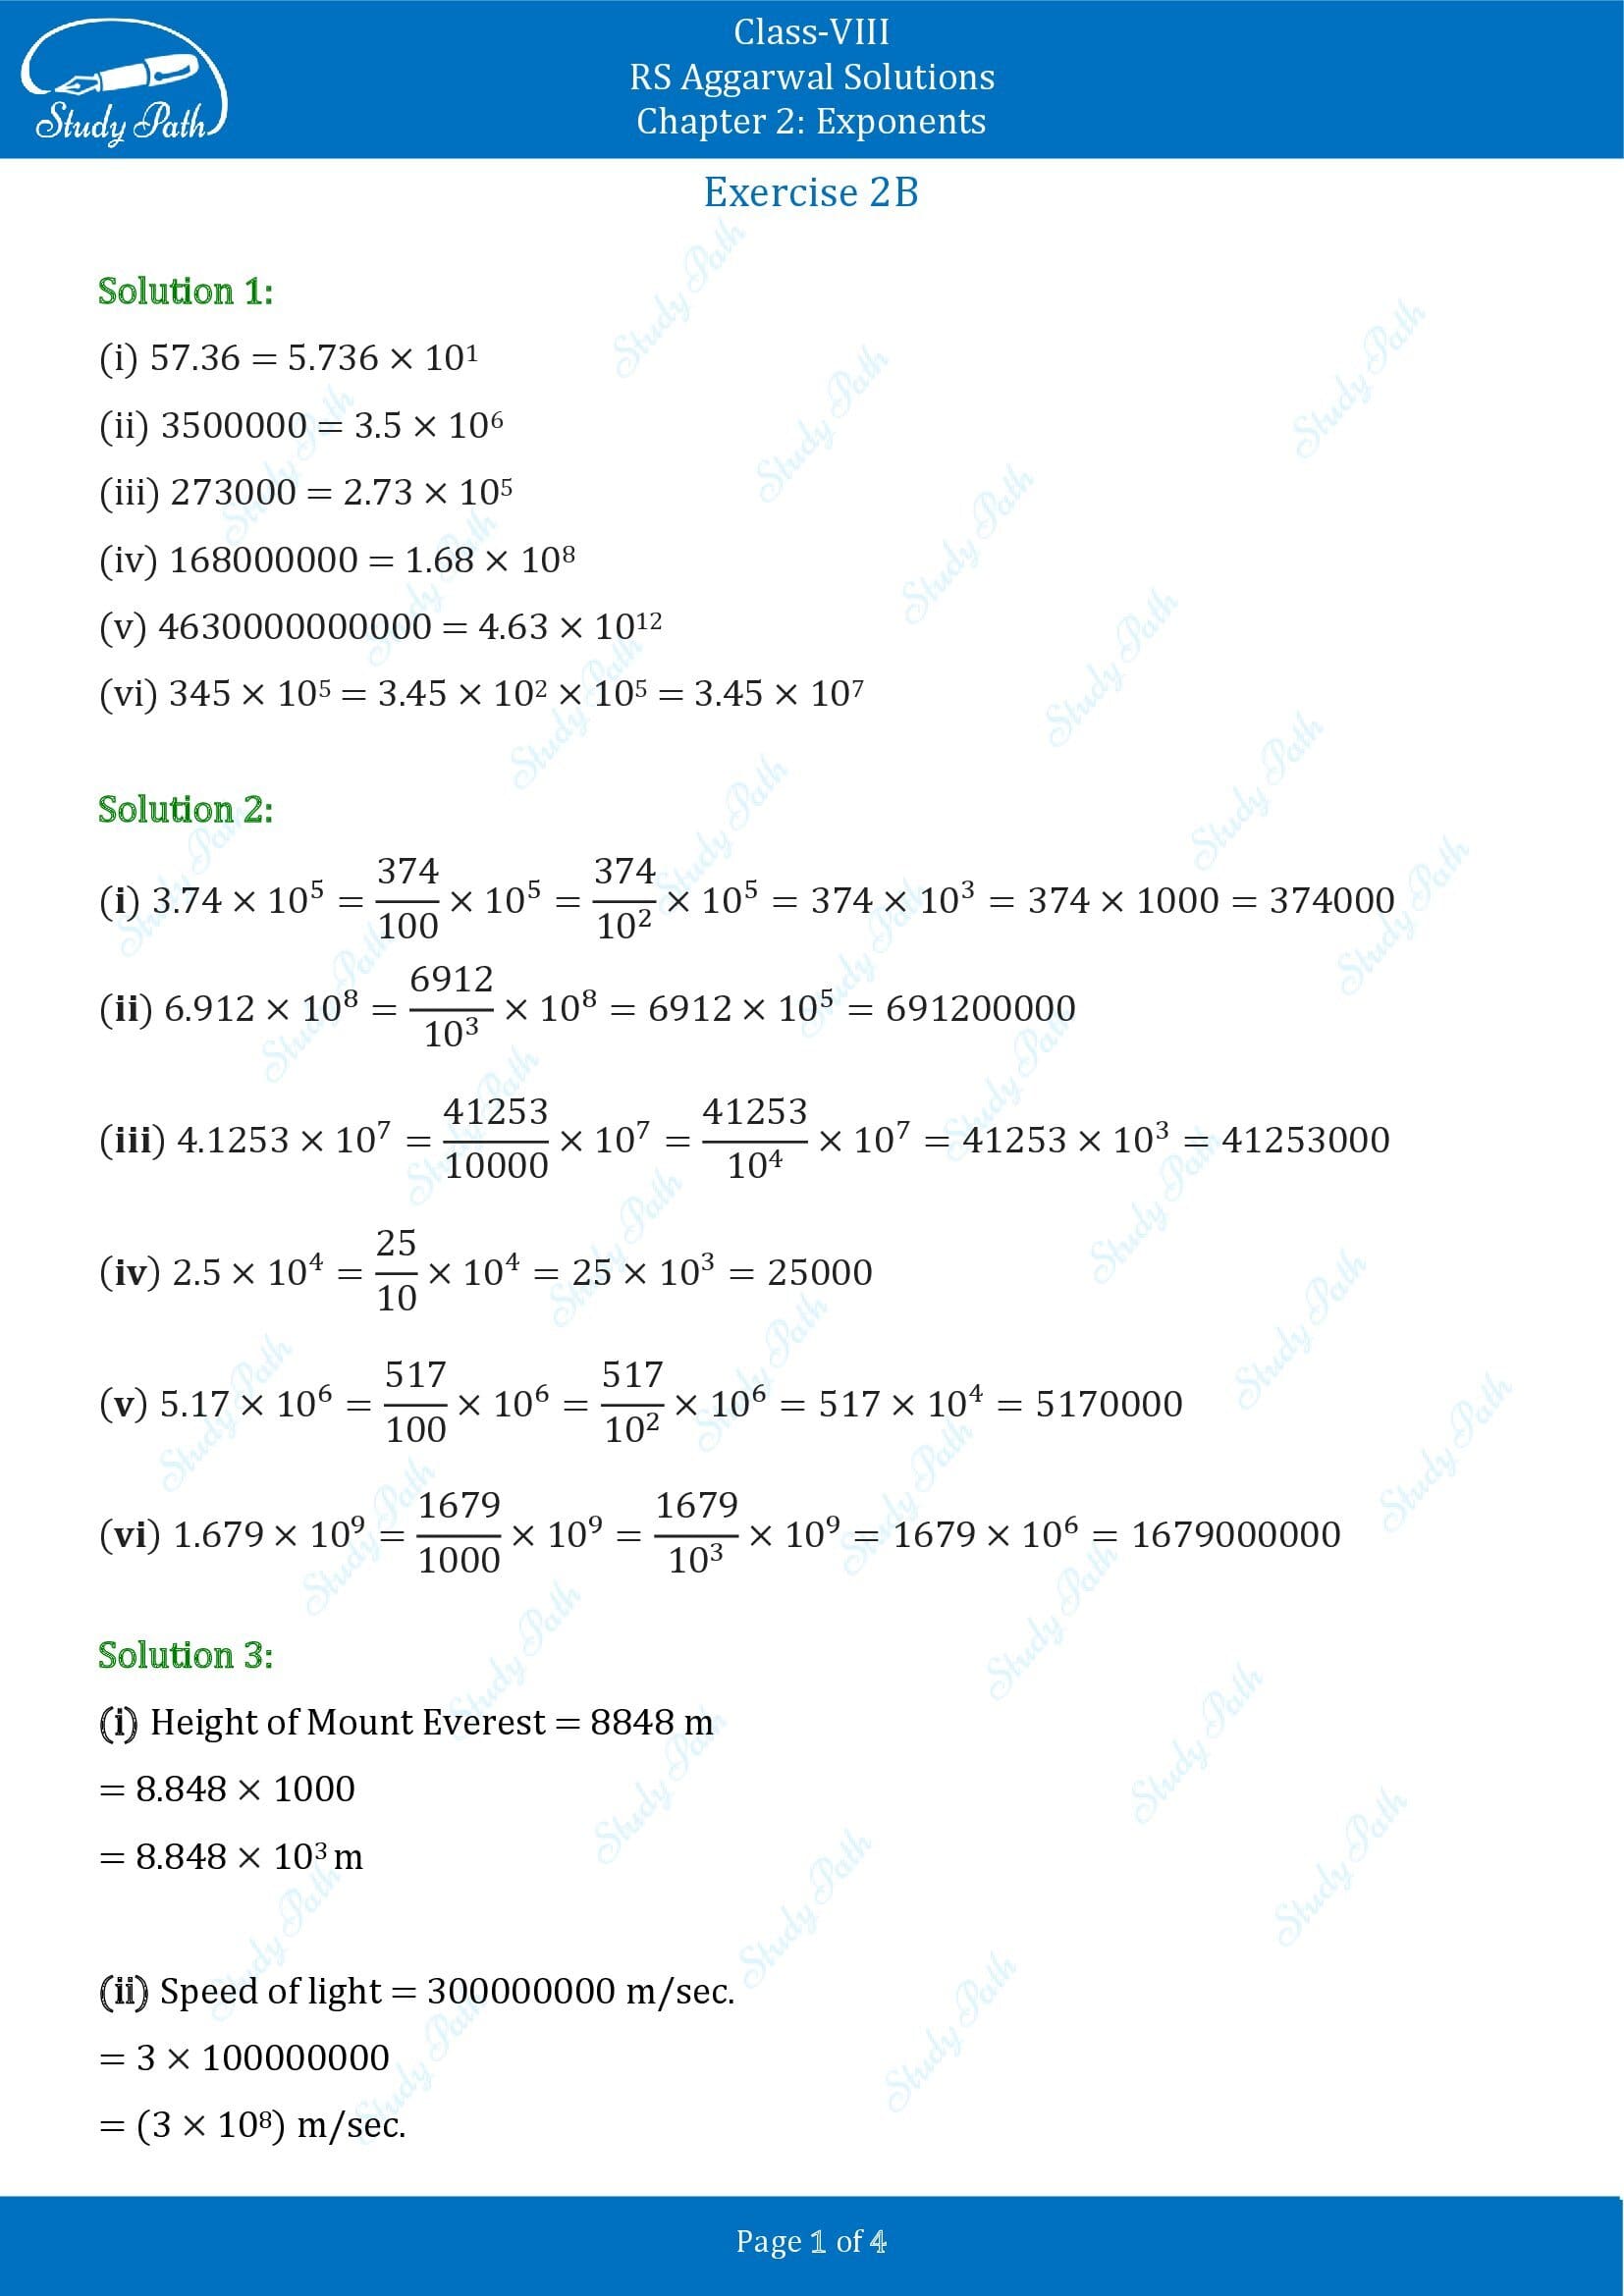 RS Aggarwal Solutions Class 8 Chapter 2 Exponents Exercise 2B 00001